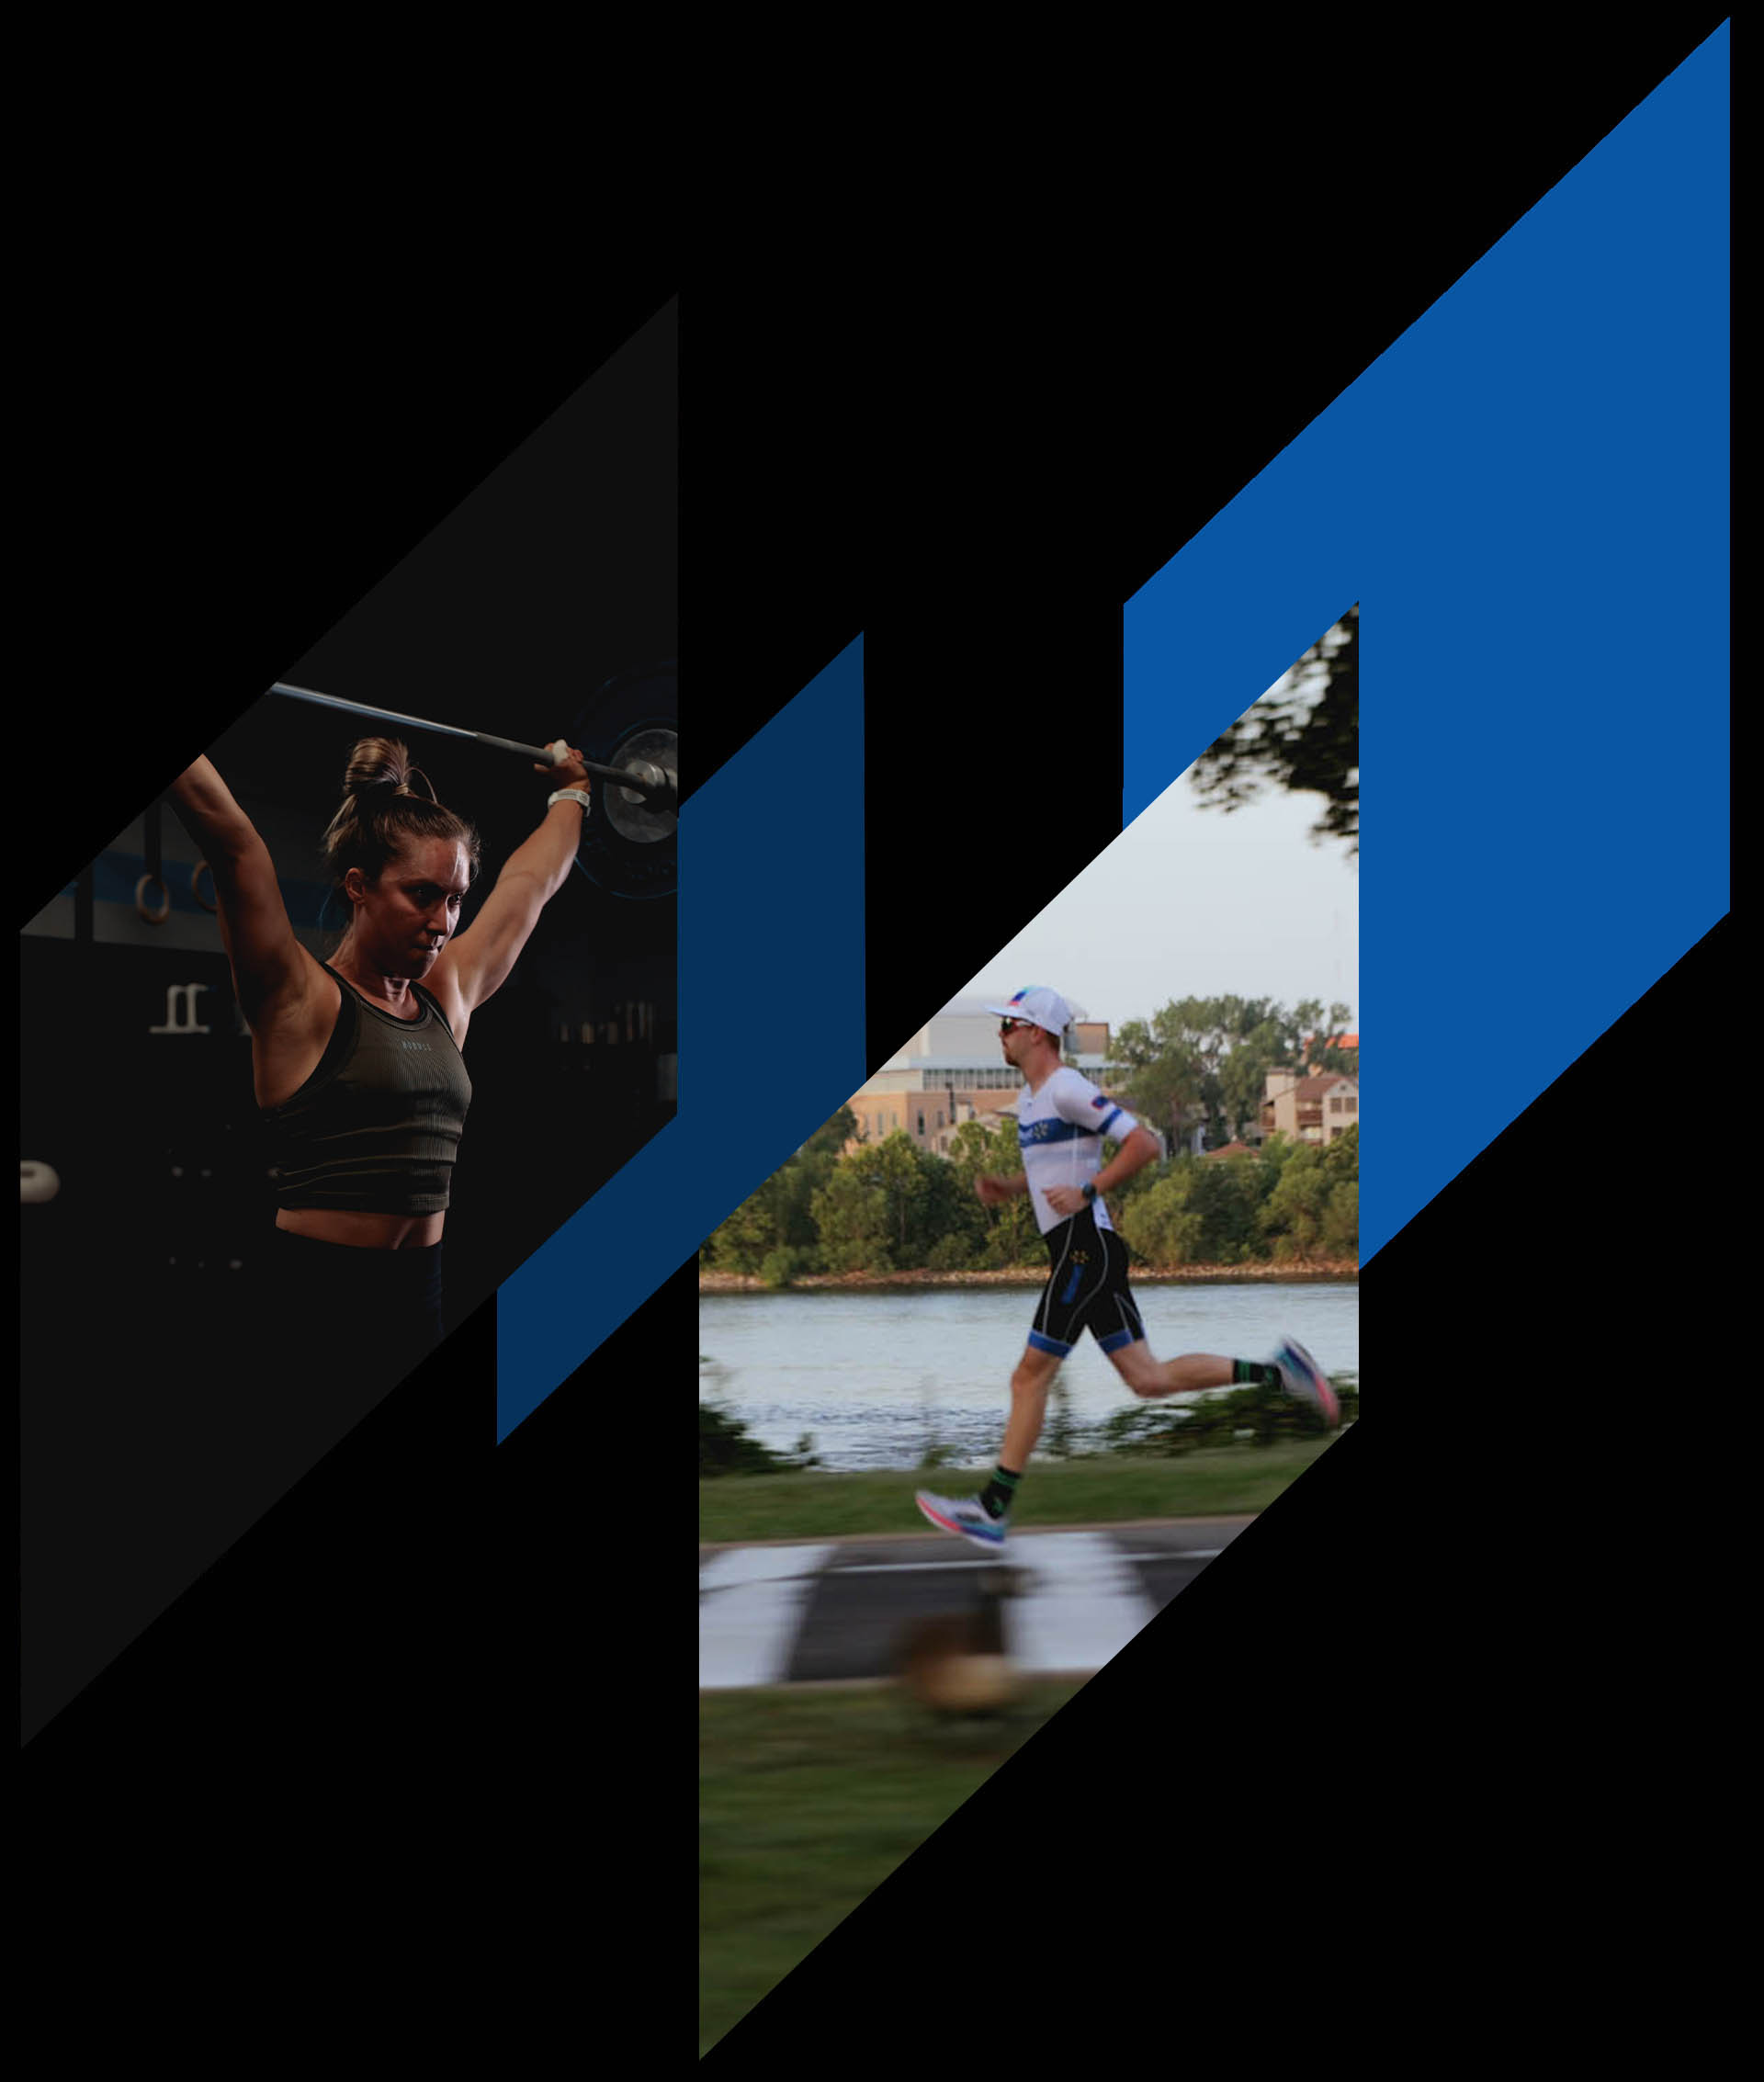 Split image showcasing a woman engaging in physical therapy by weightlifting in a gym on the left and a man running outdoors by a river on the right, divided by a blue zigzag pattern.